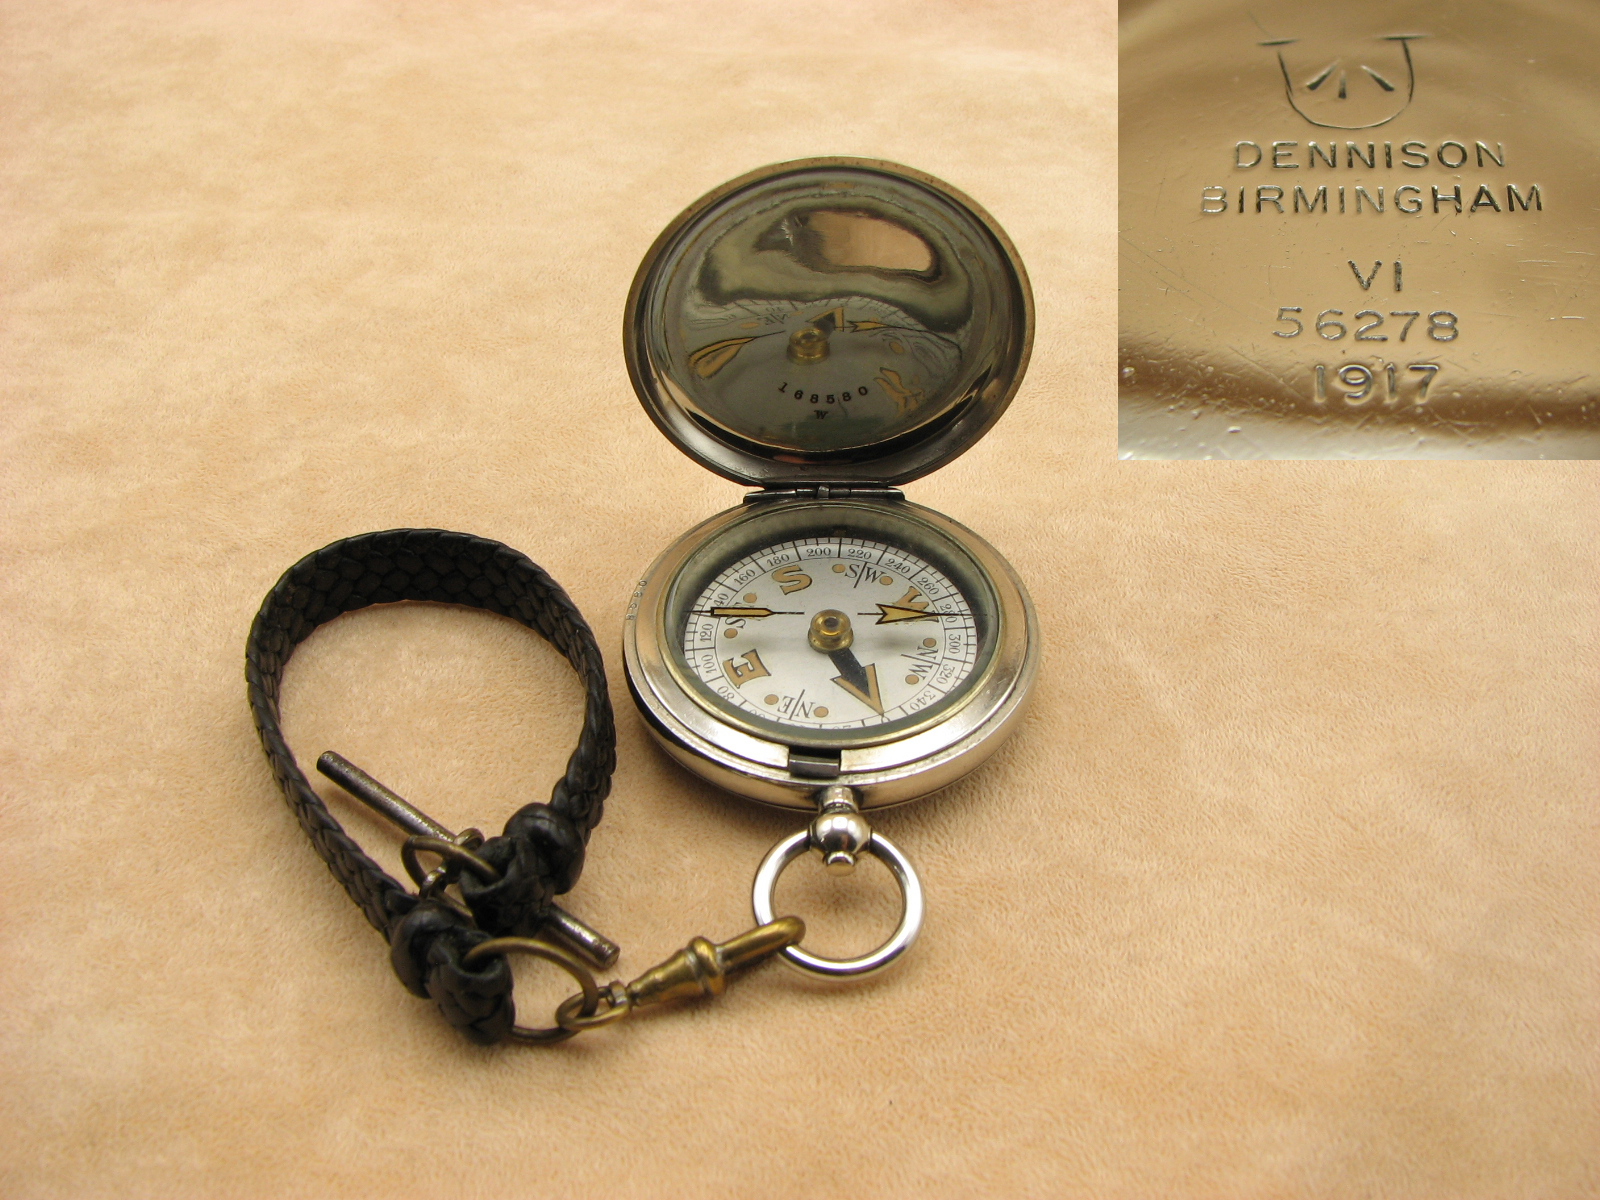 Rare Dennison WW1 MK VI compass with Union of South Africa military markings